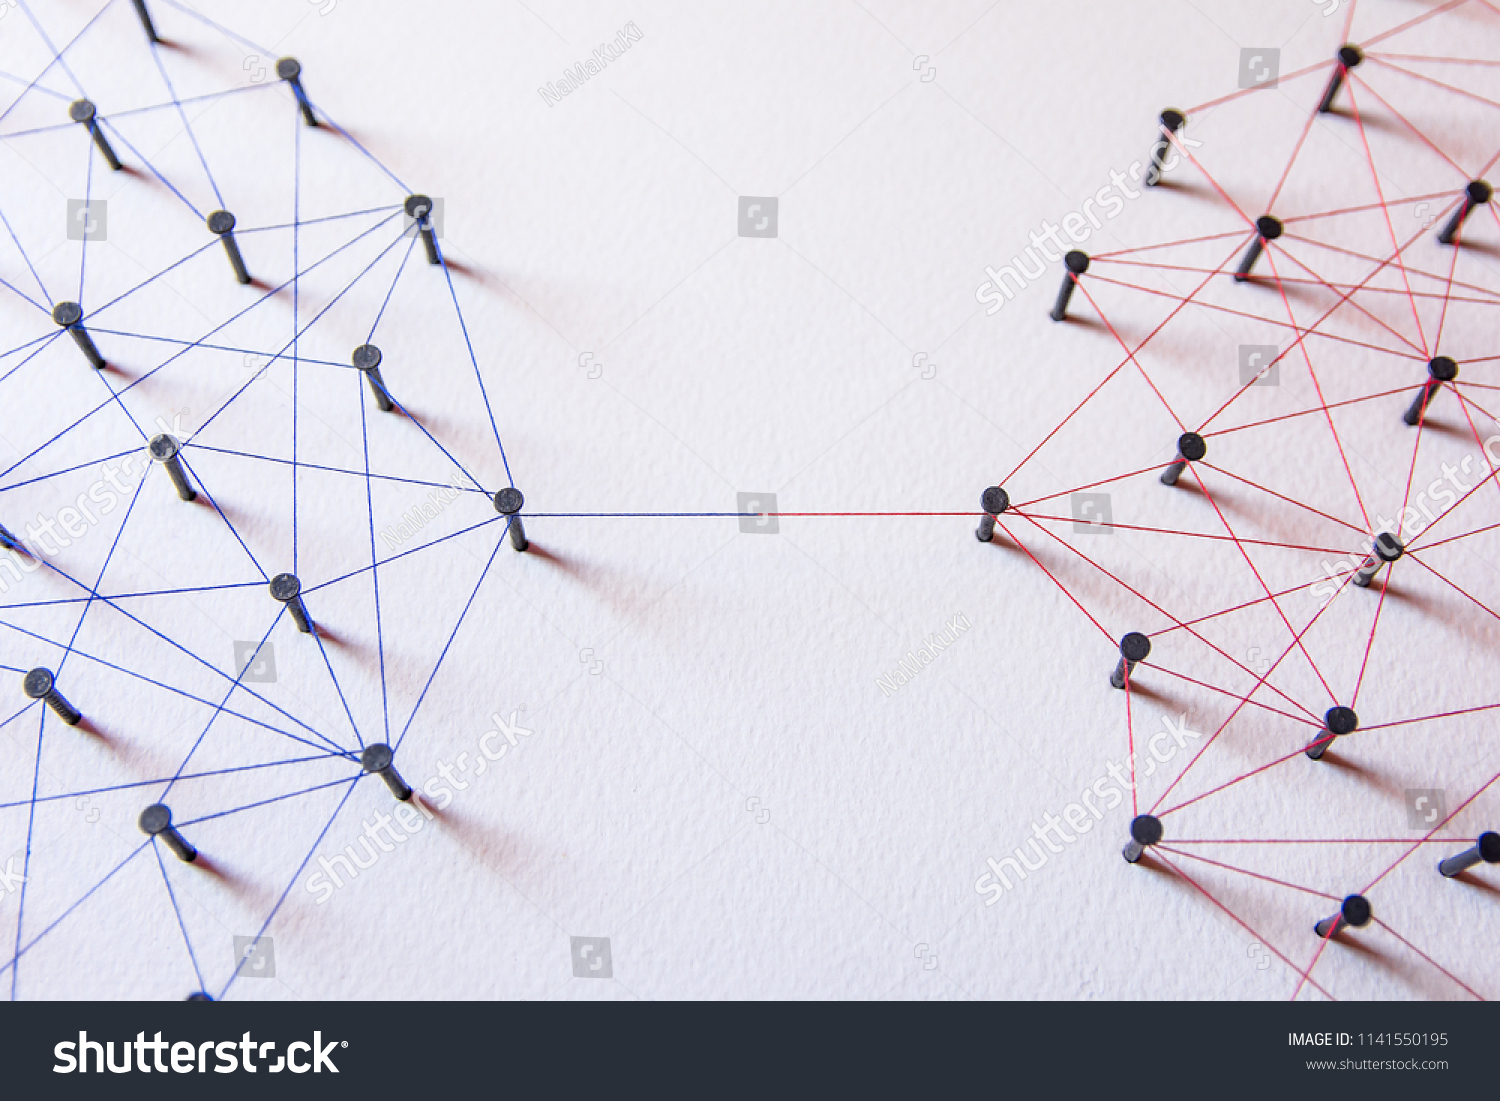 Connecting networks concept - two network connected with yarn red and blue on white paper. Simulator connection social media, internet, people communication #1141550195